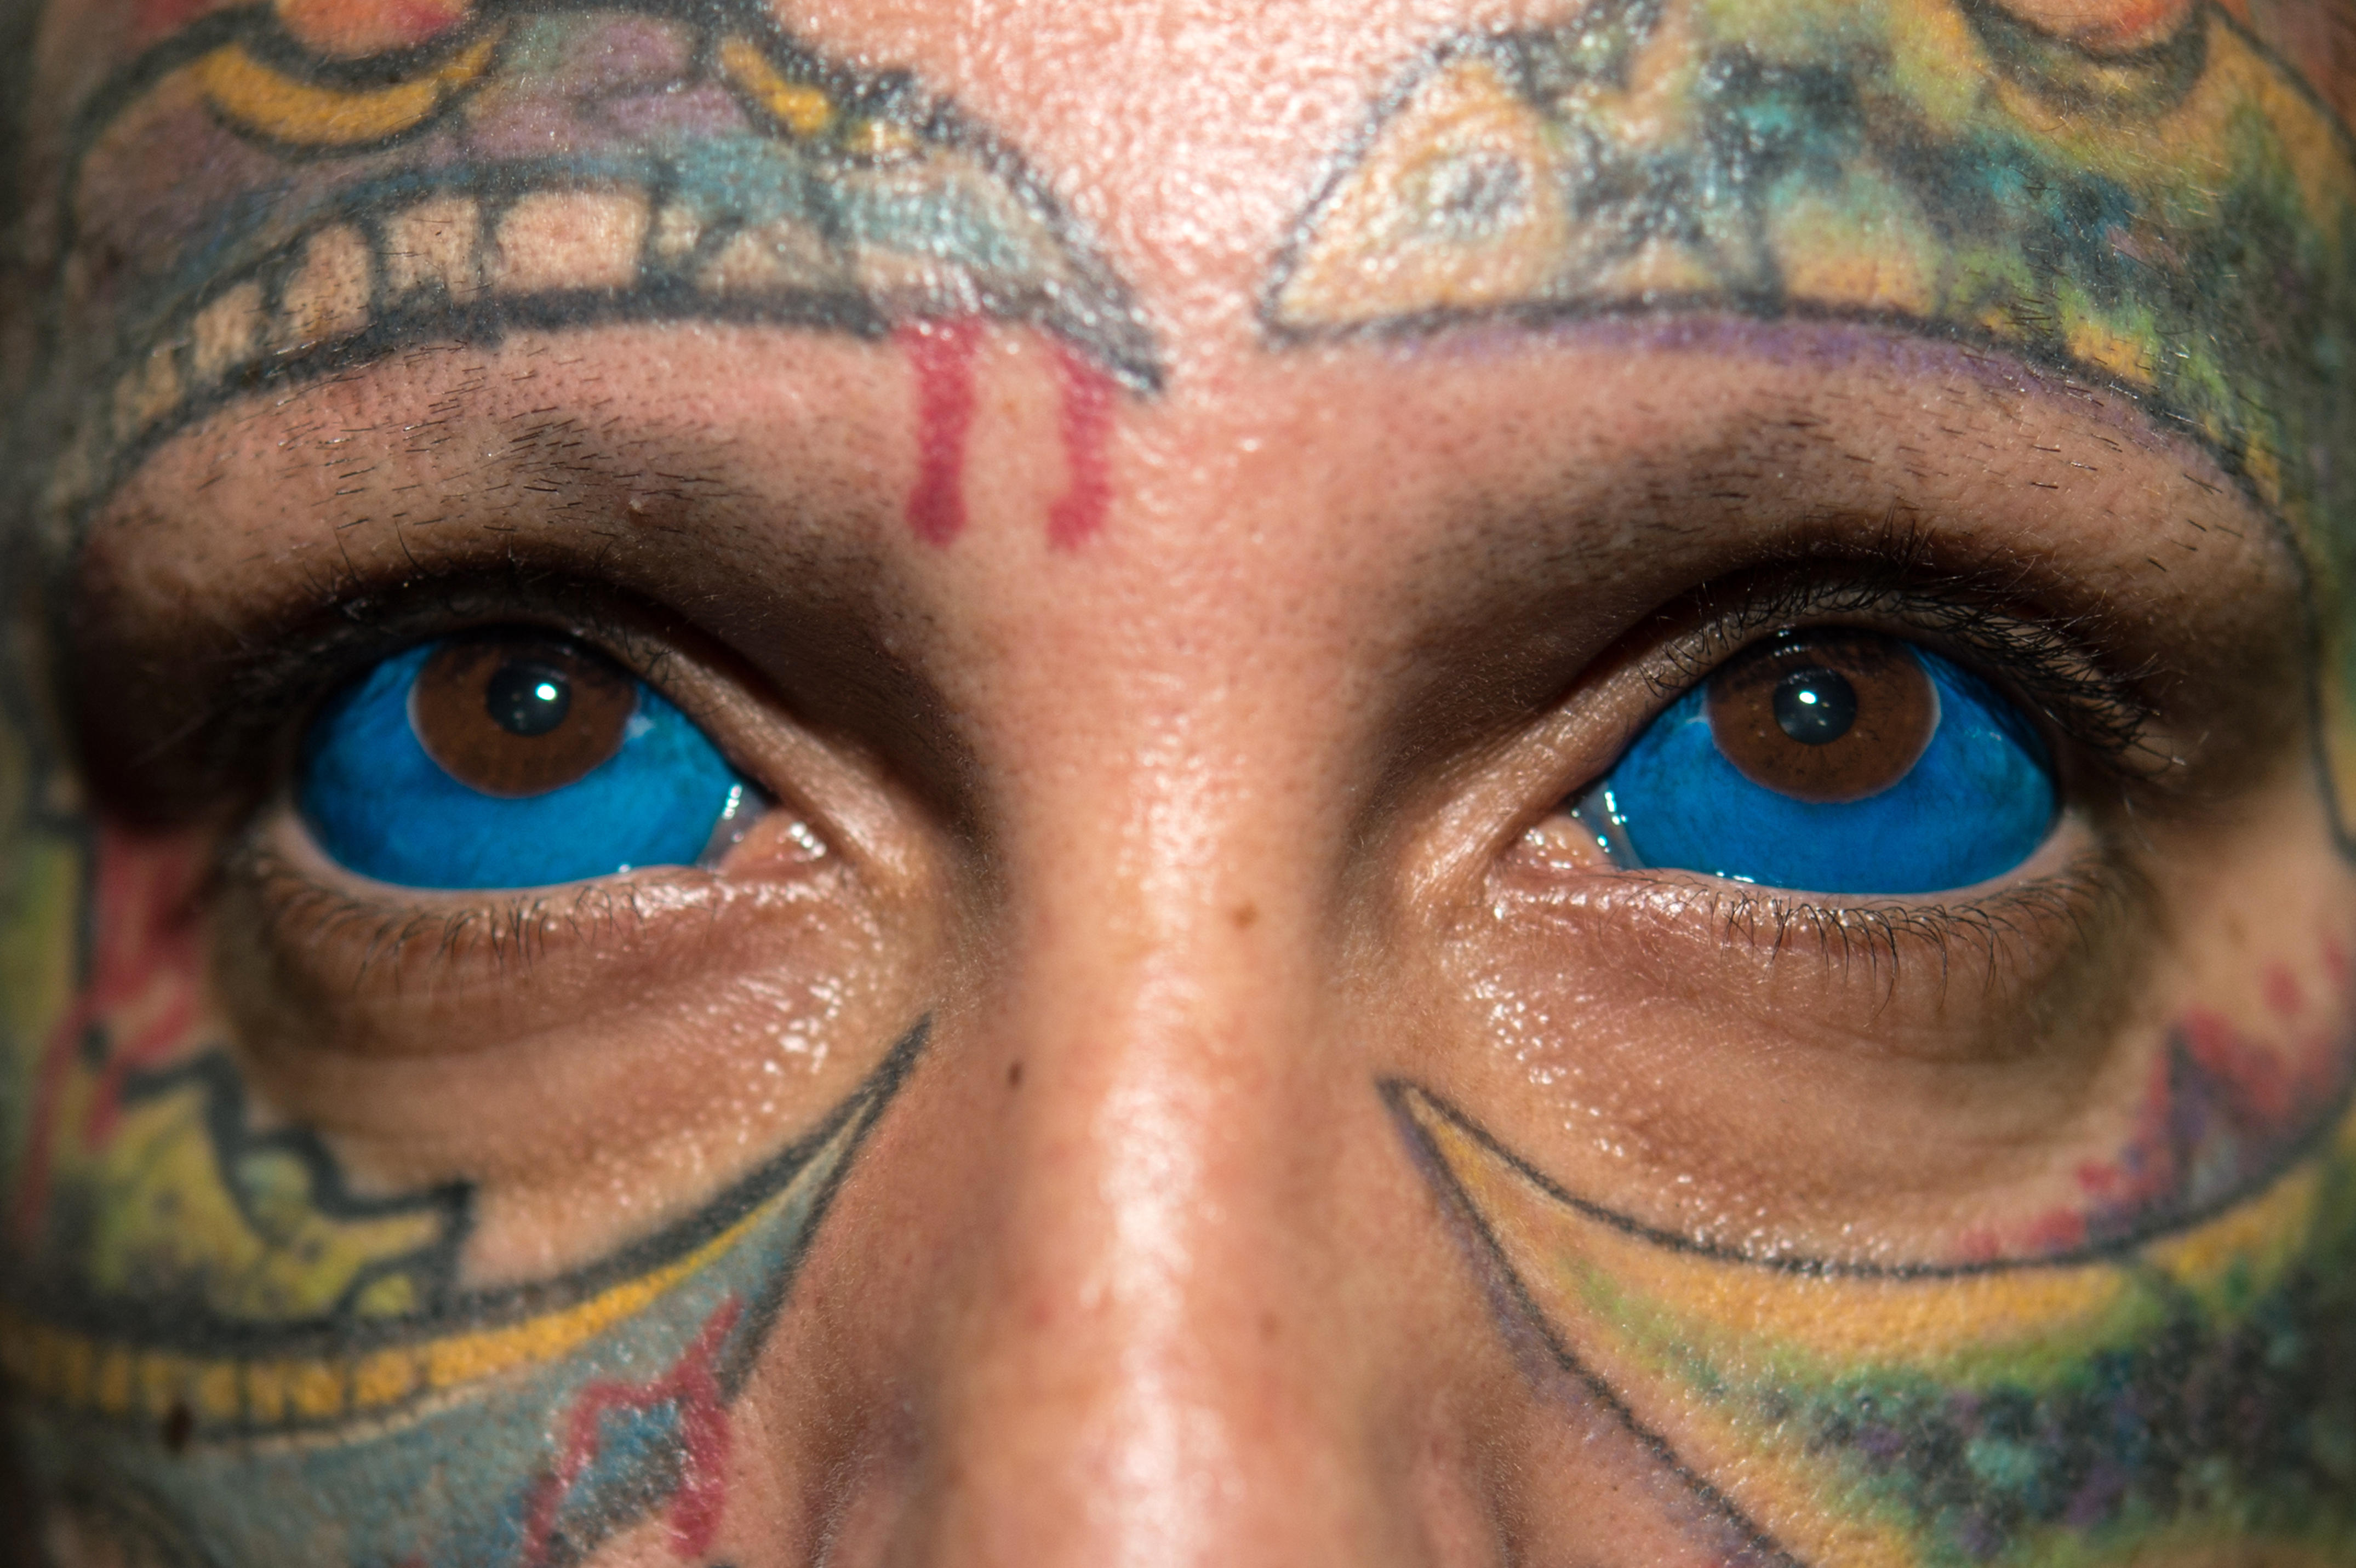 Sclera tattoo gone wrong prompts warning from model Catt Gallinger - CBS News